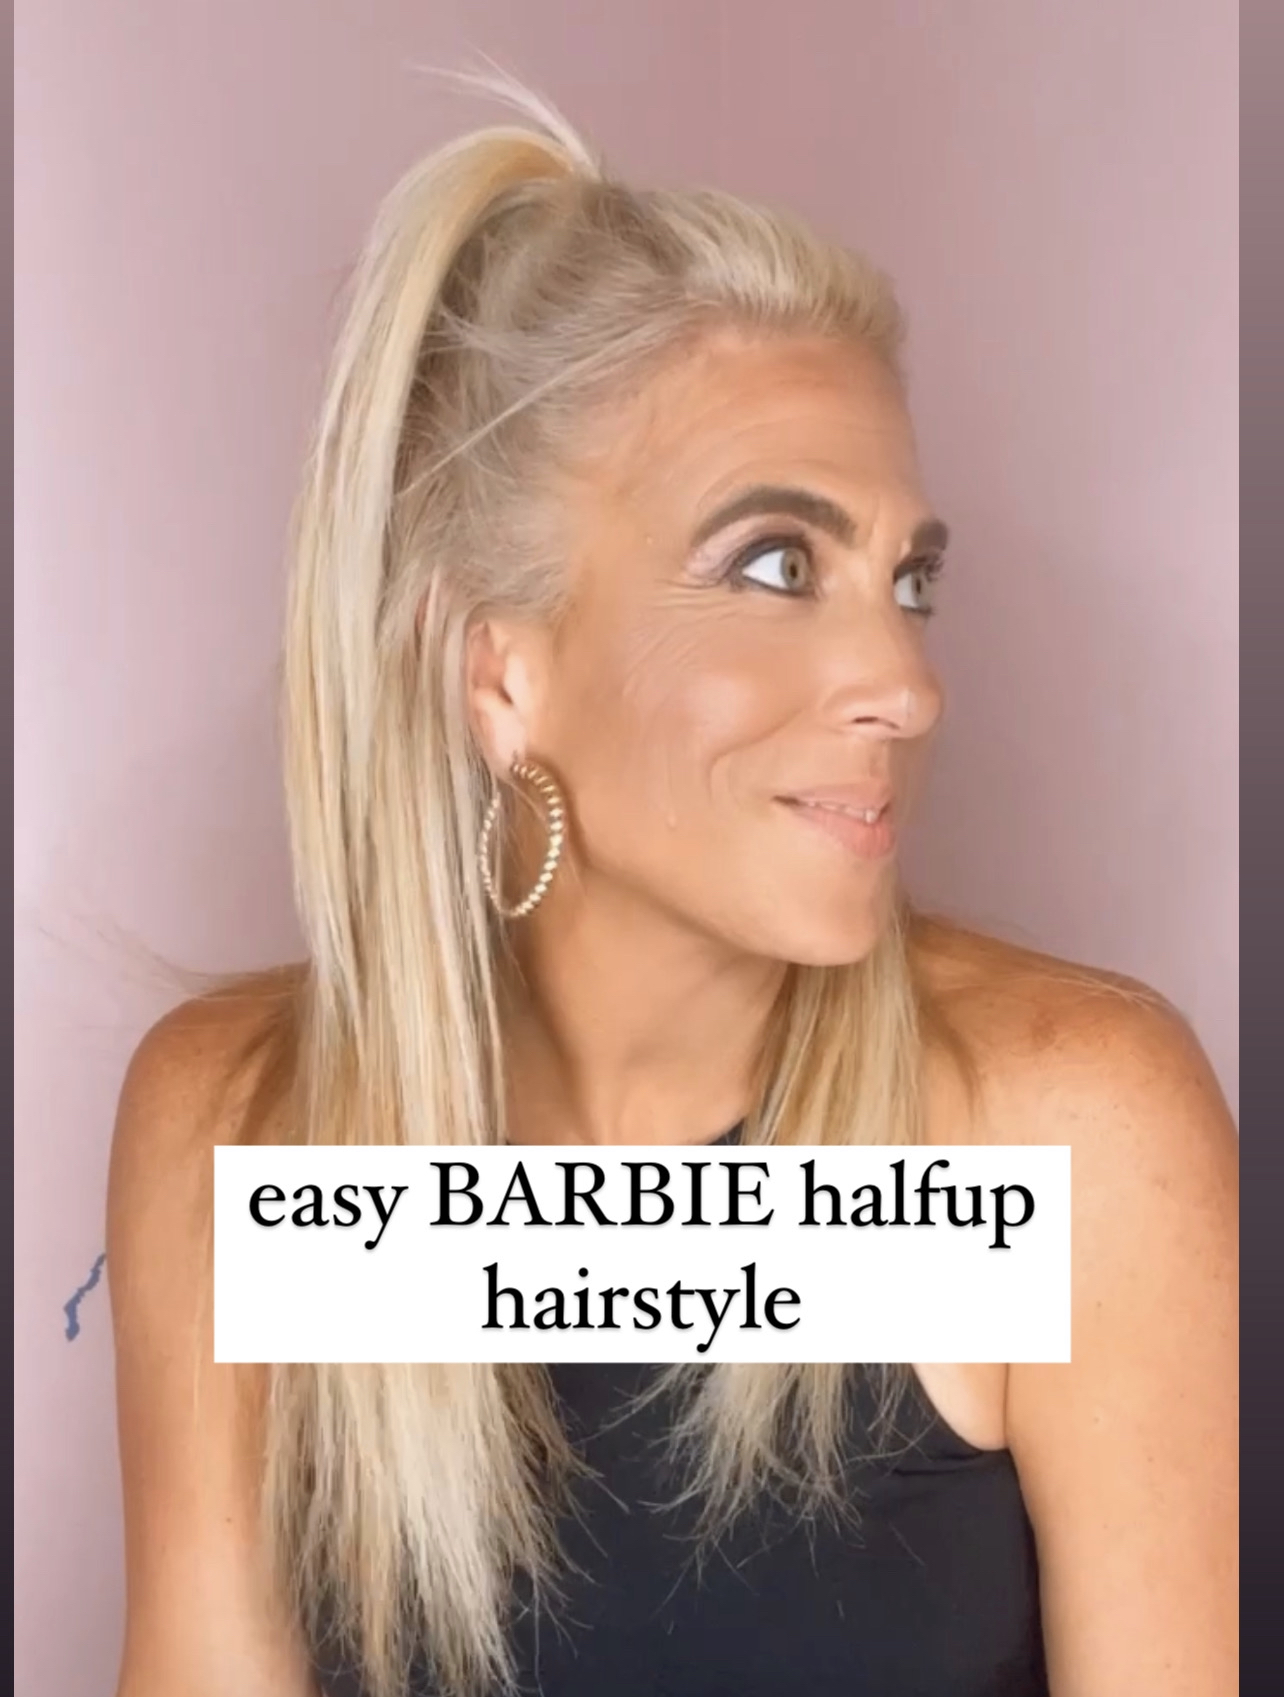 15 Barbiecore Hairstyle Ideas for Natural Hair | NaturallyCurly.com